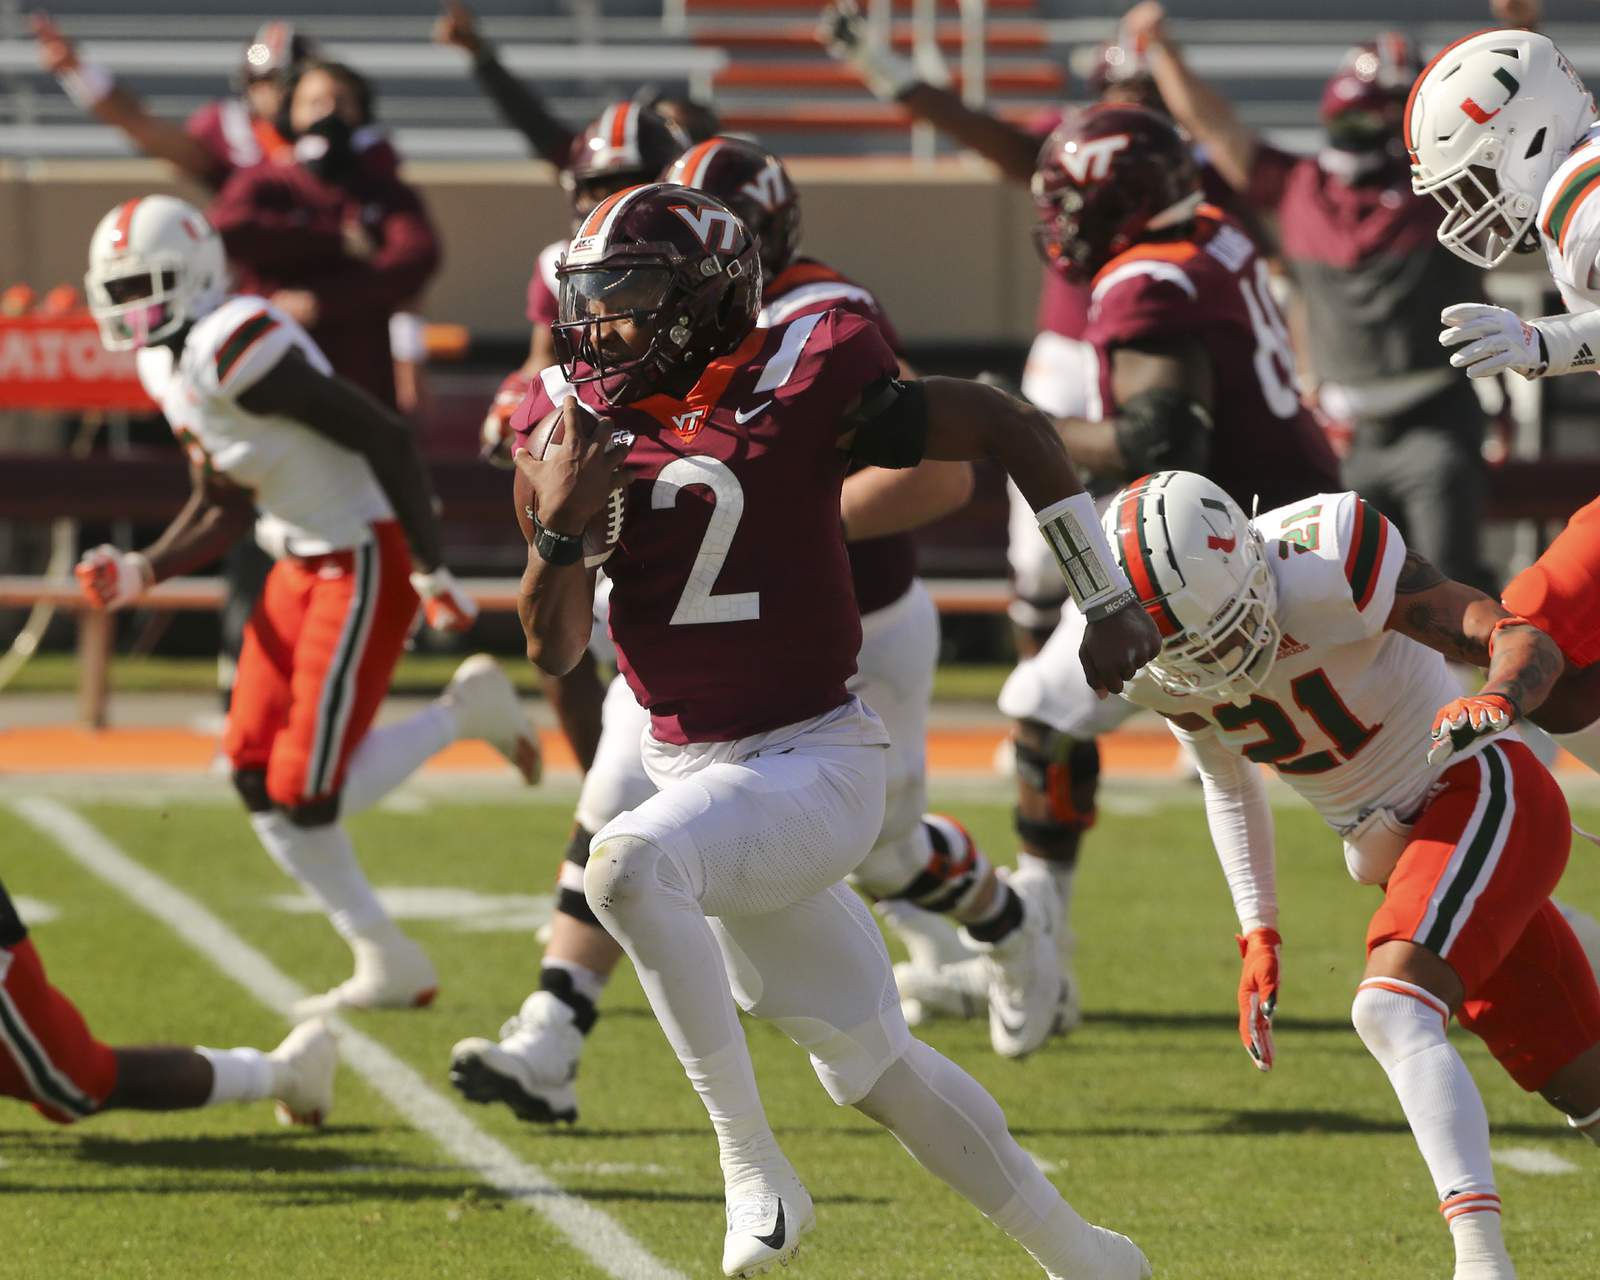 Hokies end long stretch of games on the road at Pitt